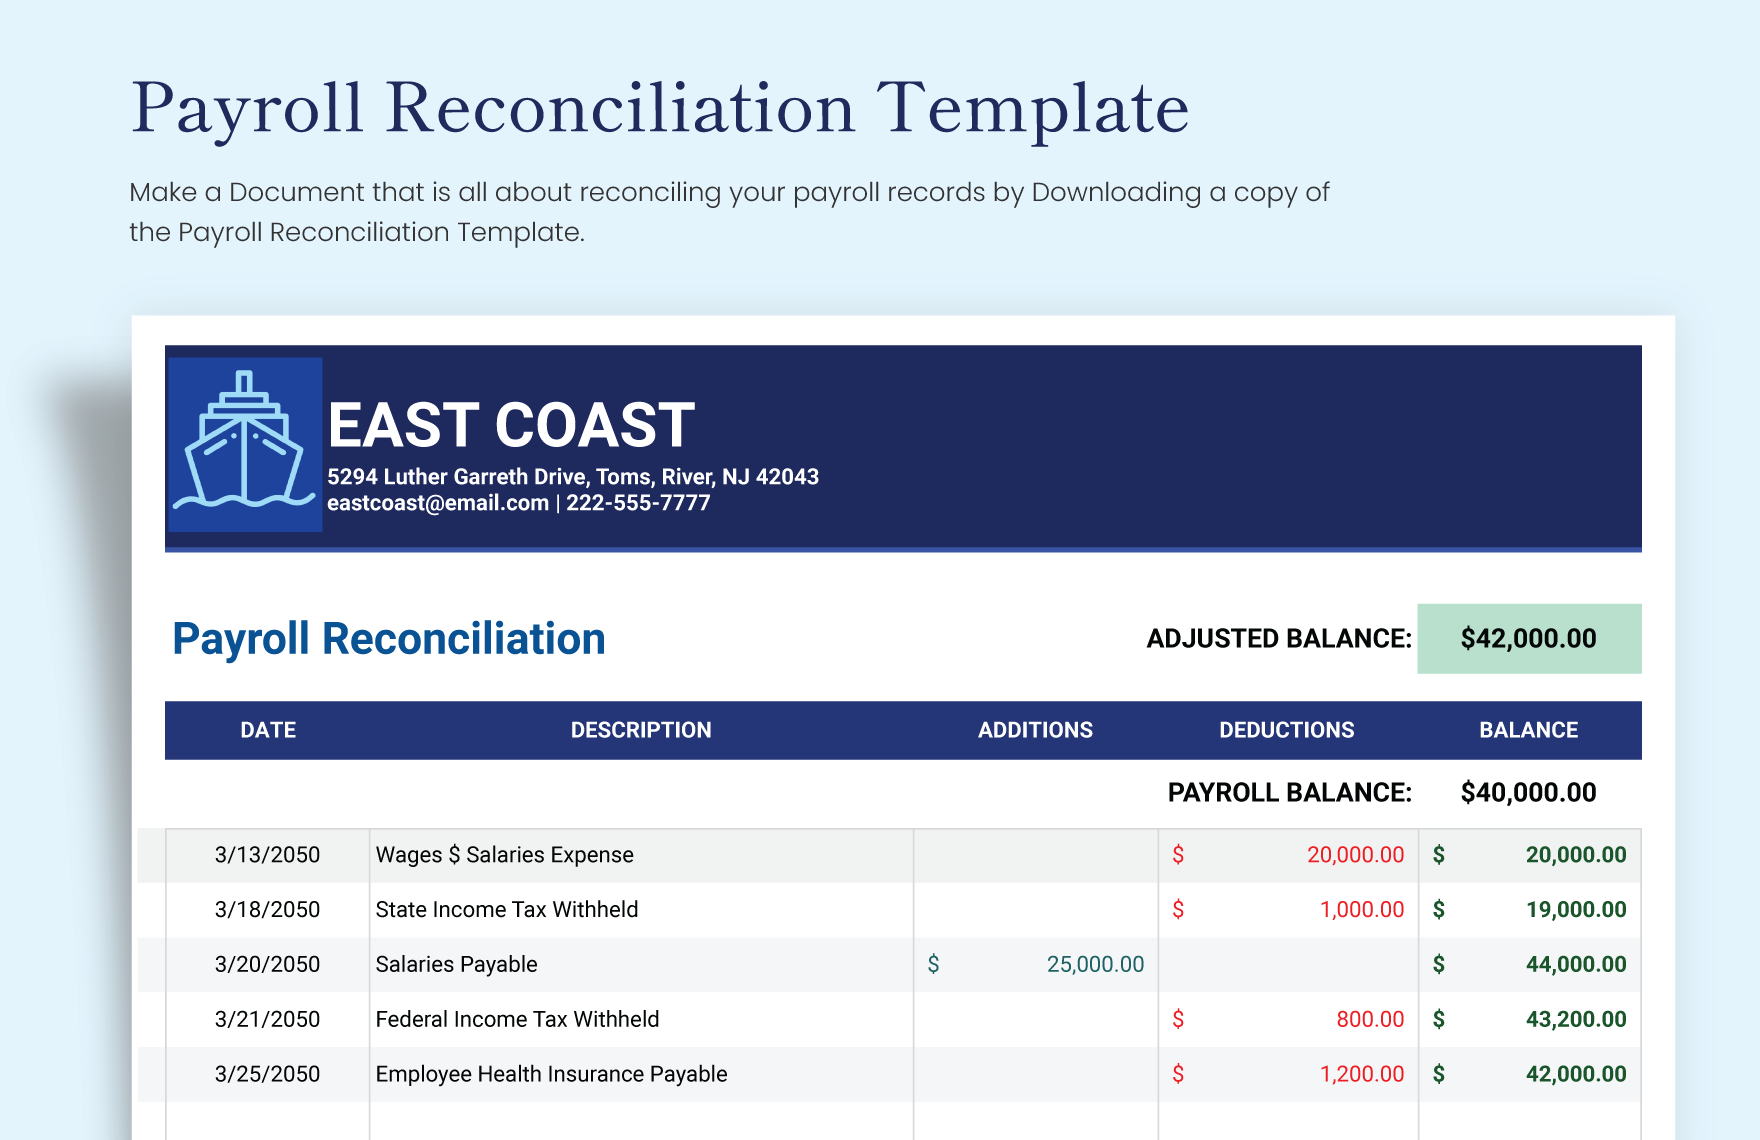 Payroll Reconciliation Template in Excel, Google Sheets